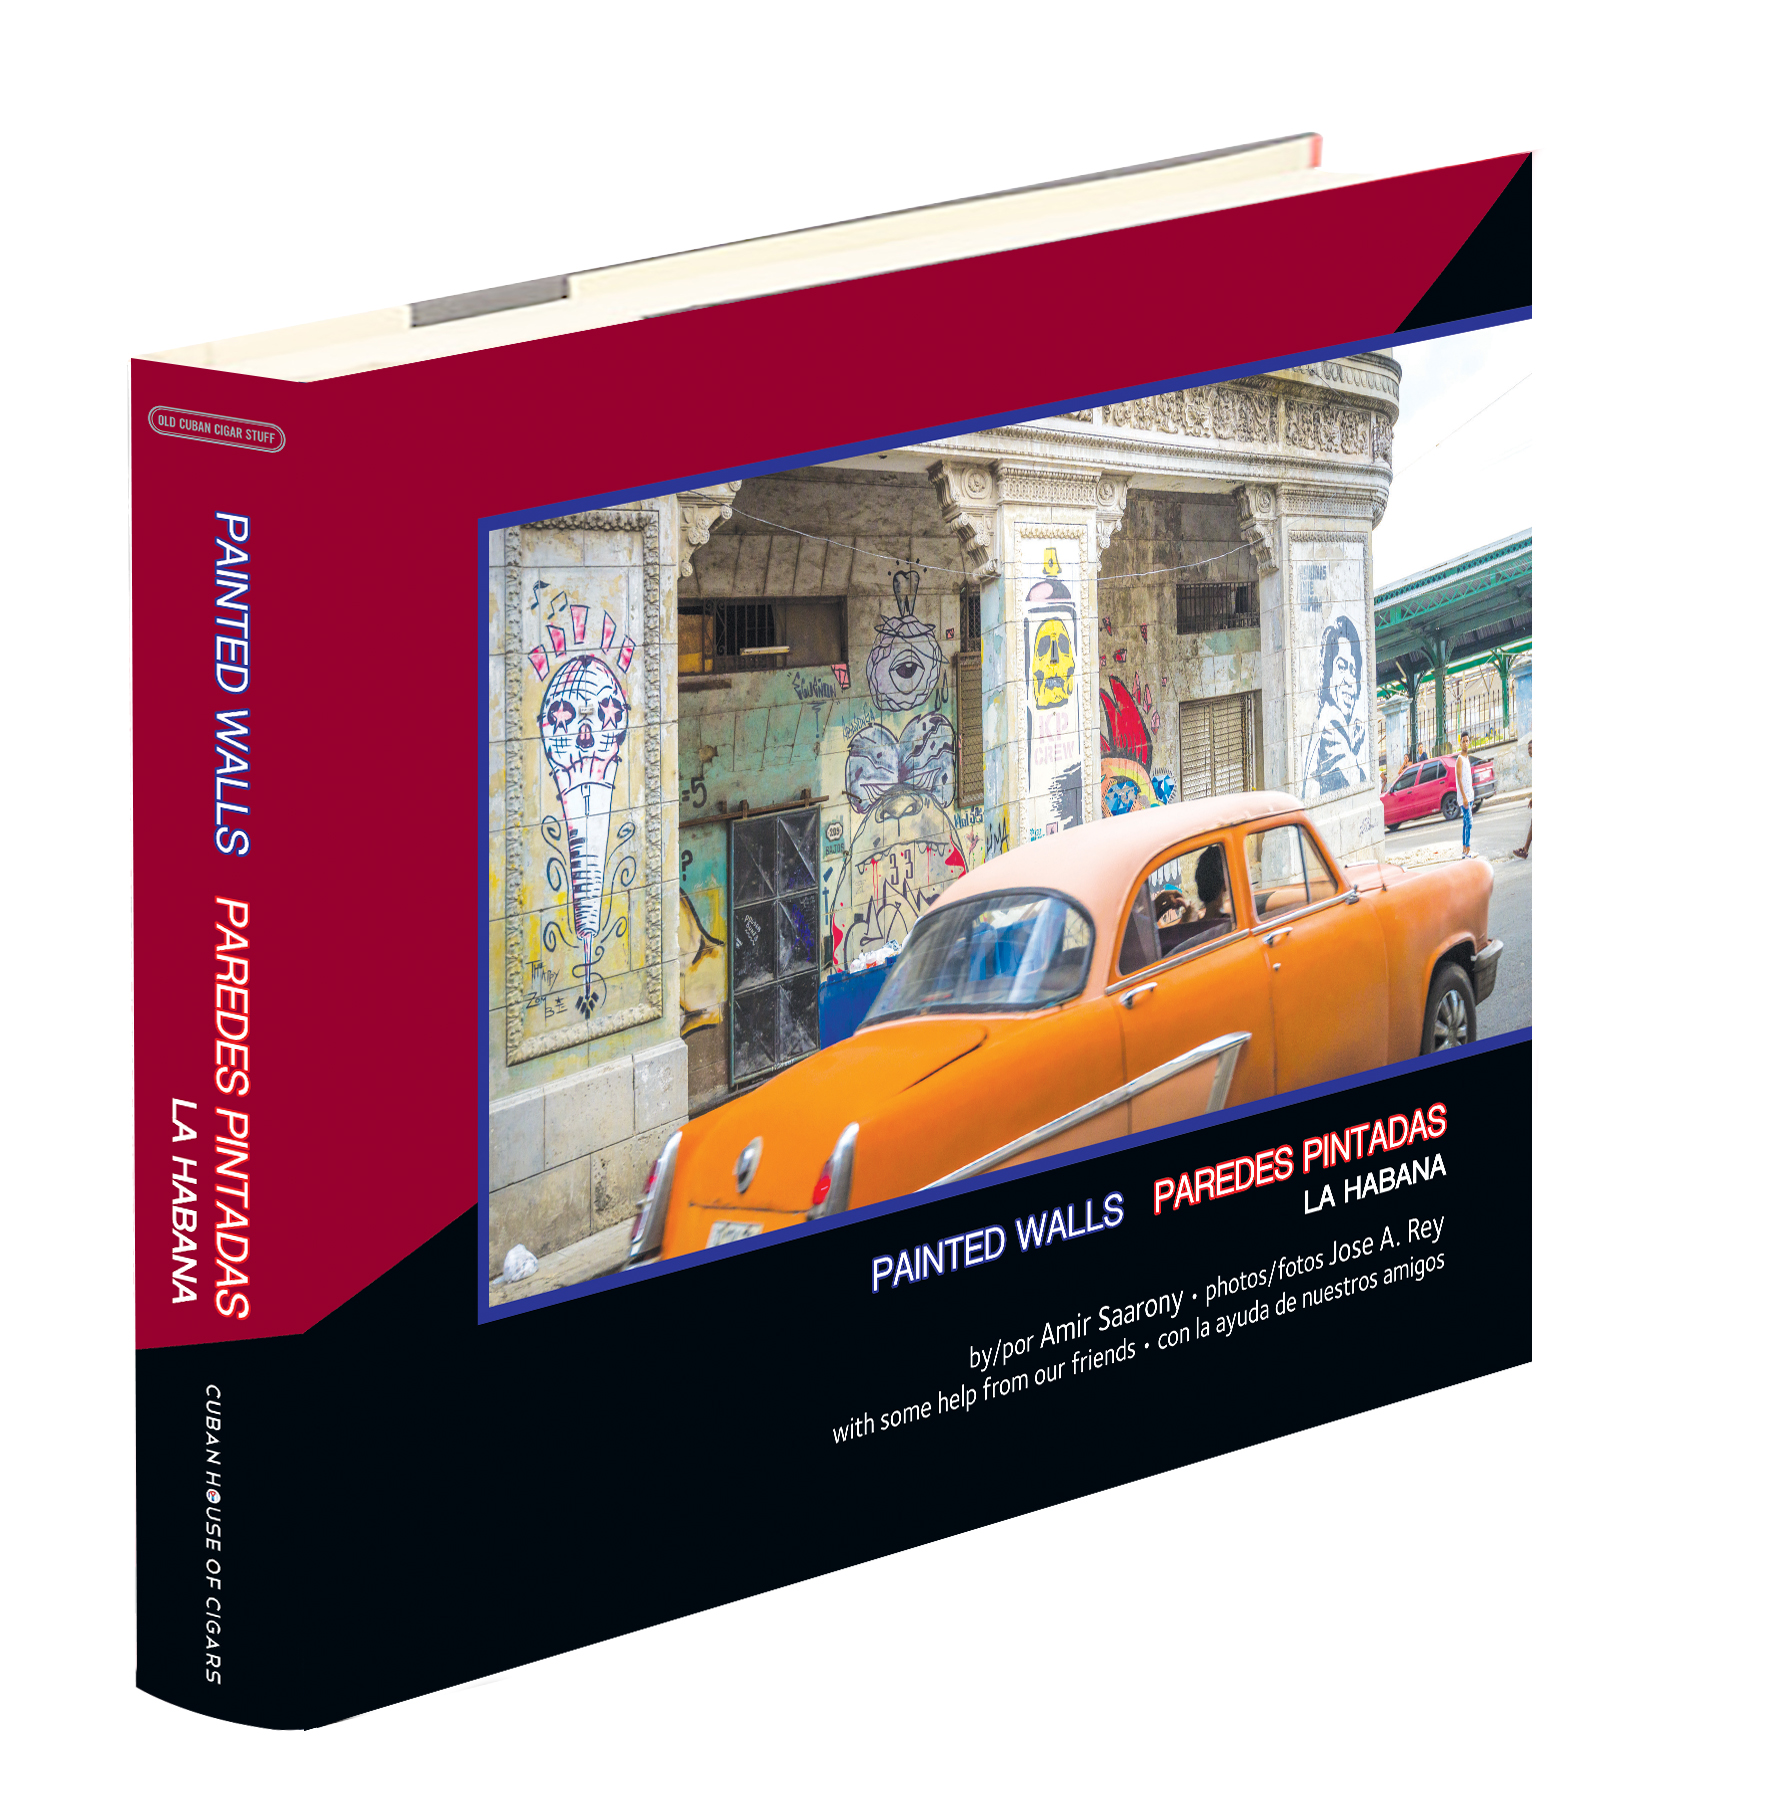 Partagas Book Author Launches New book "Painted Walls - La Habana".  Interview with Amir Saarony.